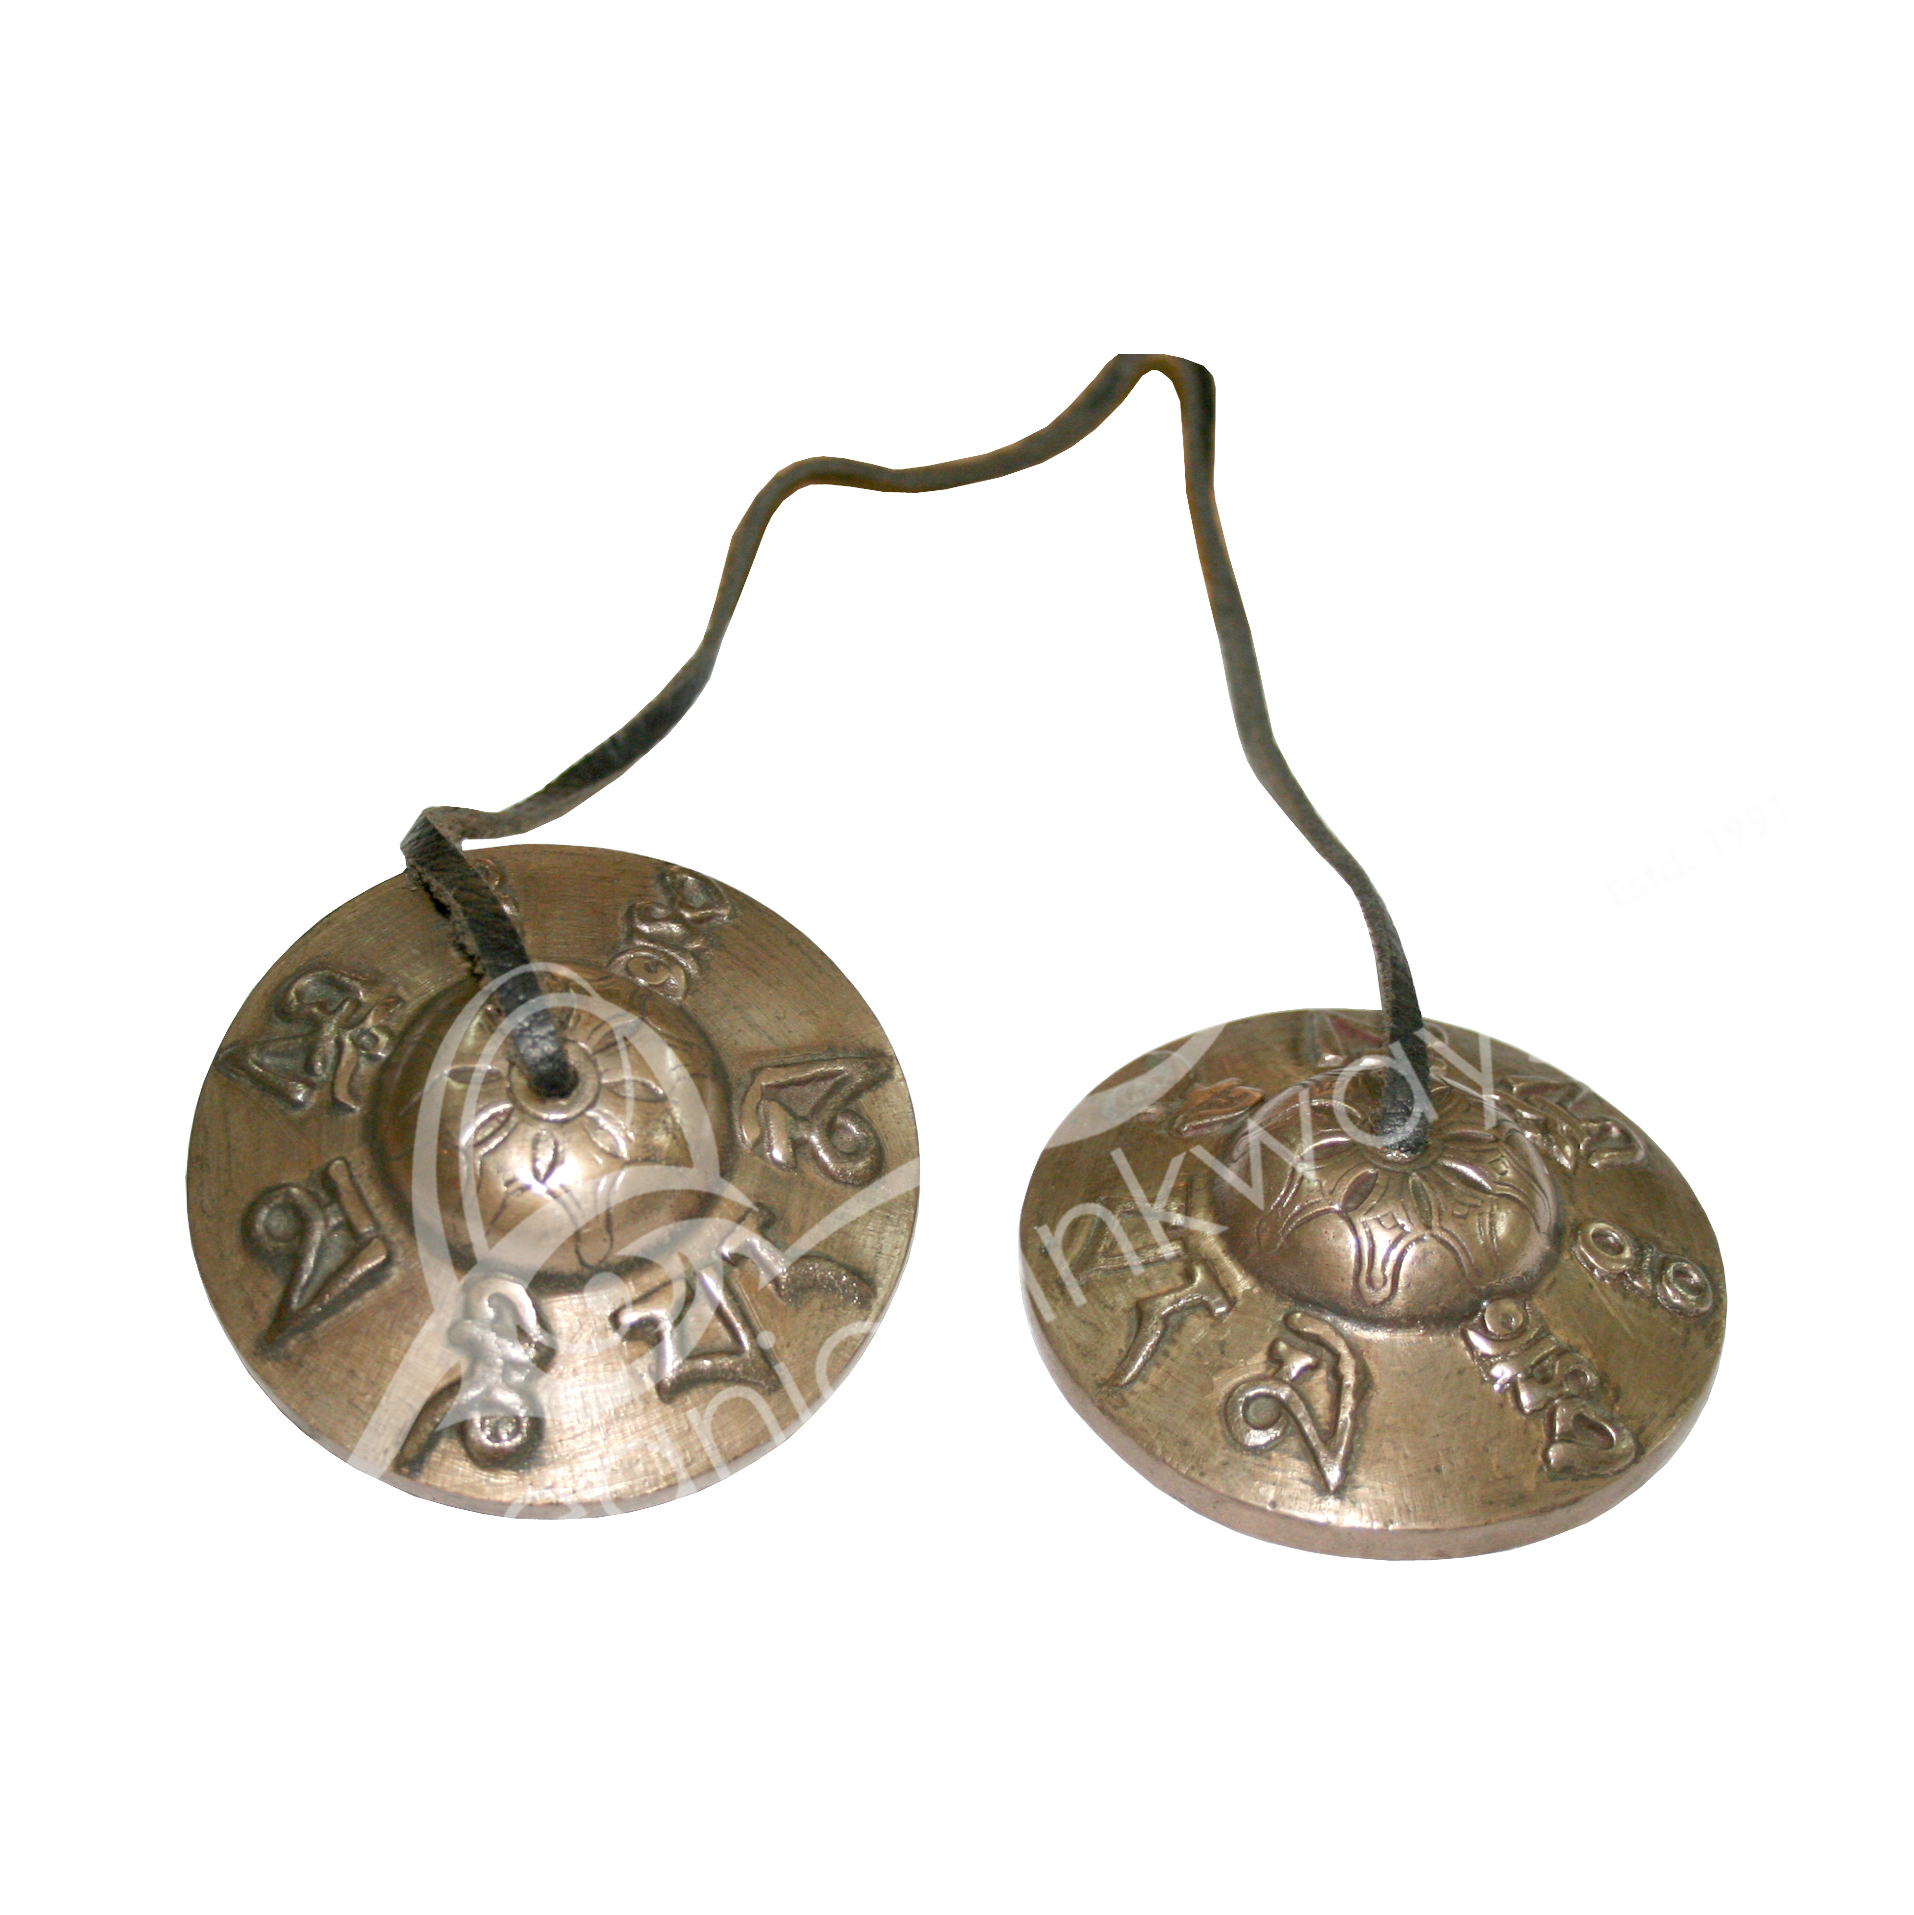 Tingsha Mantra Bell Brass Wholesale Oceanic Linkways in NJ USA